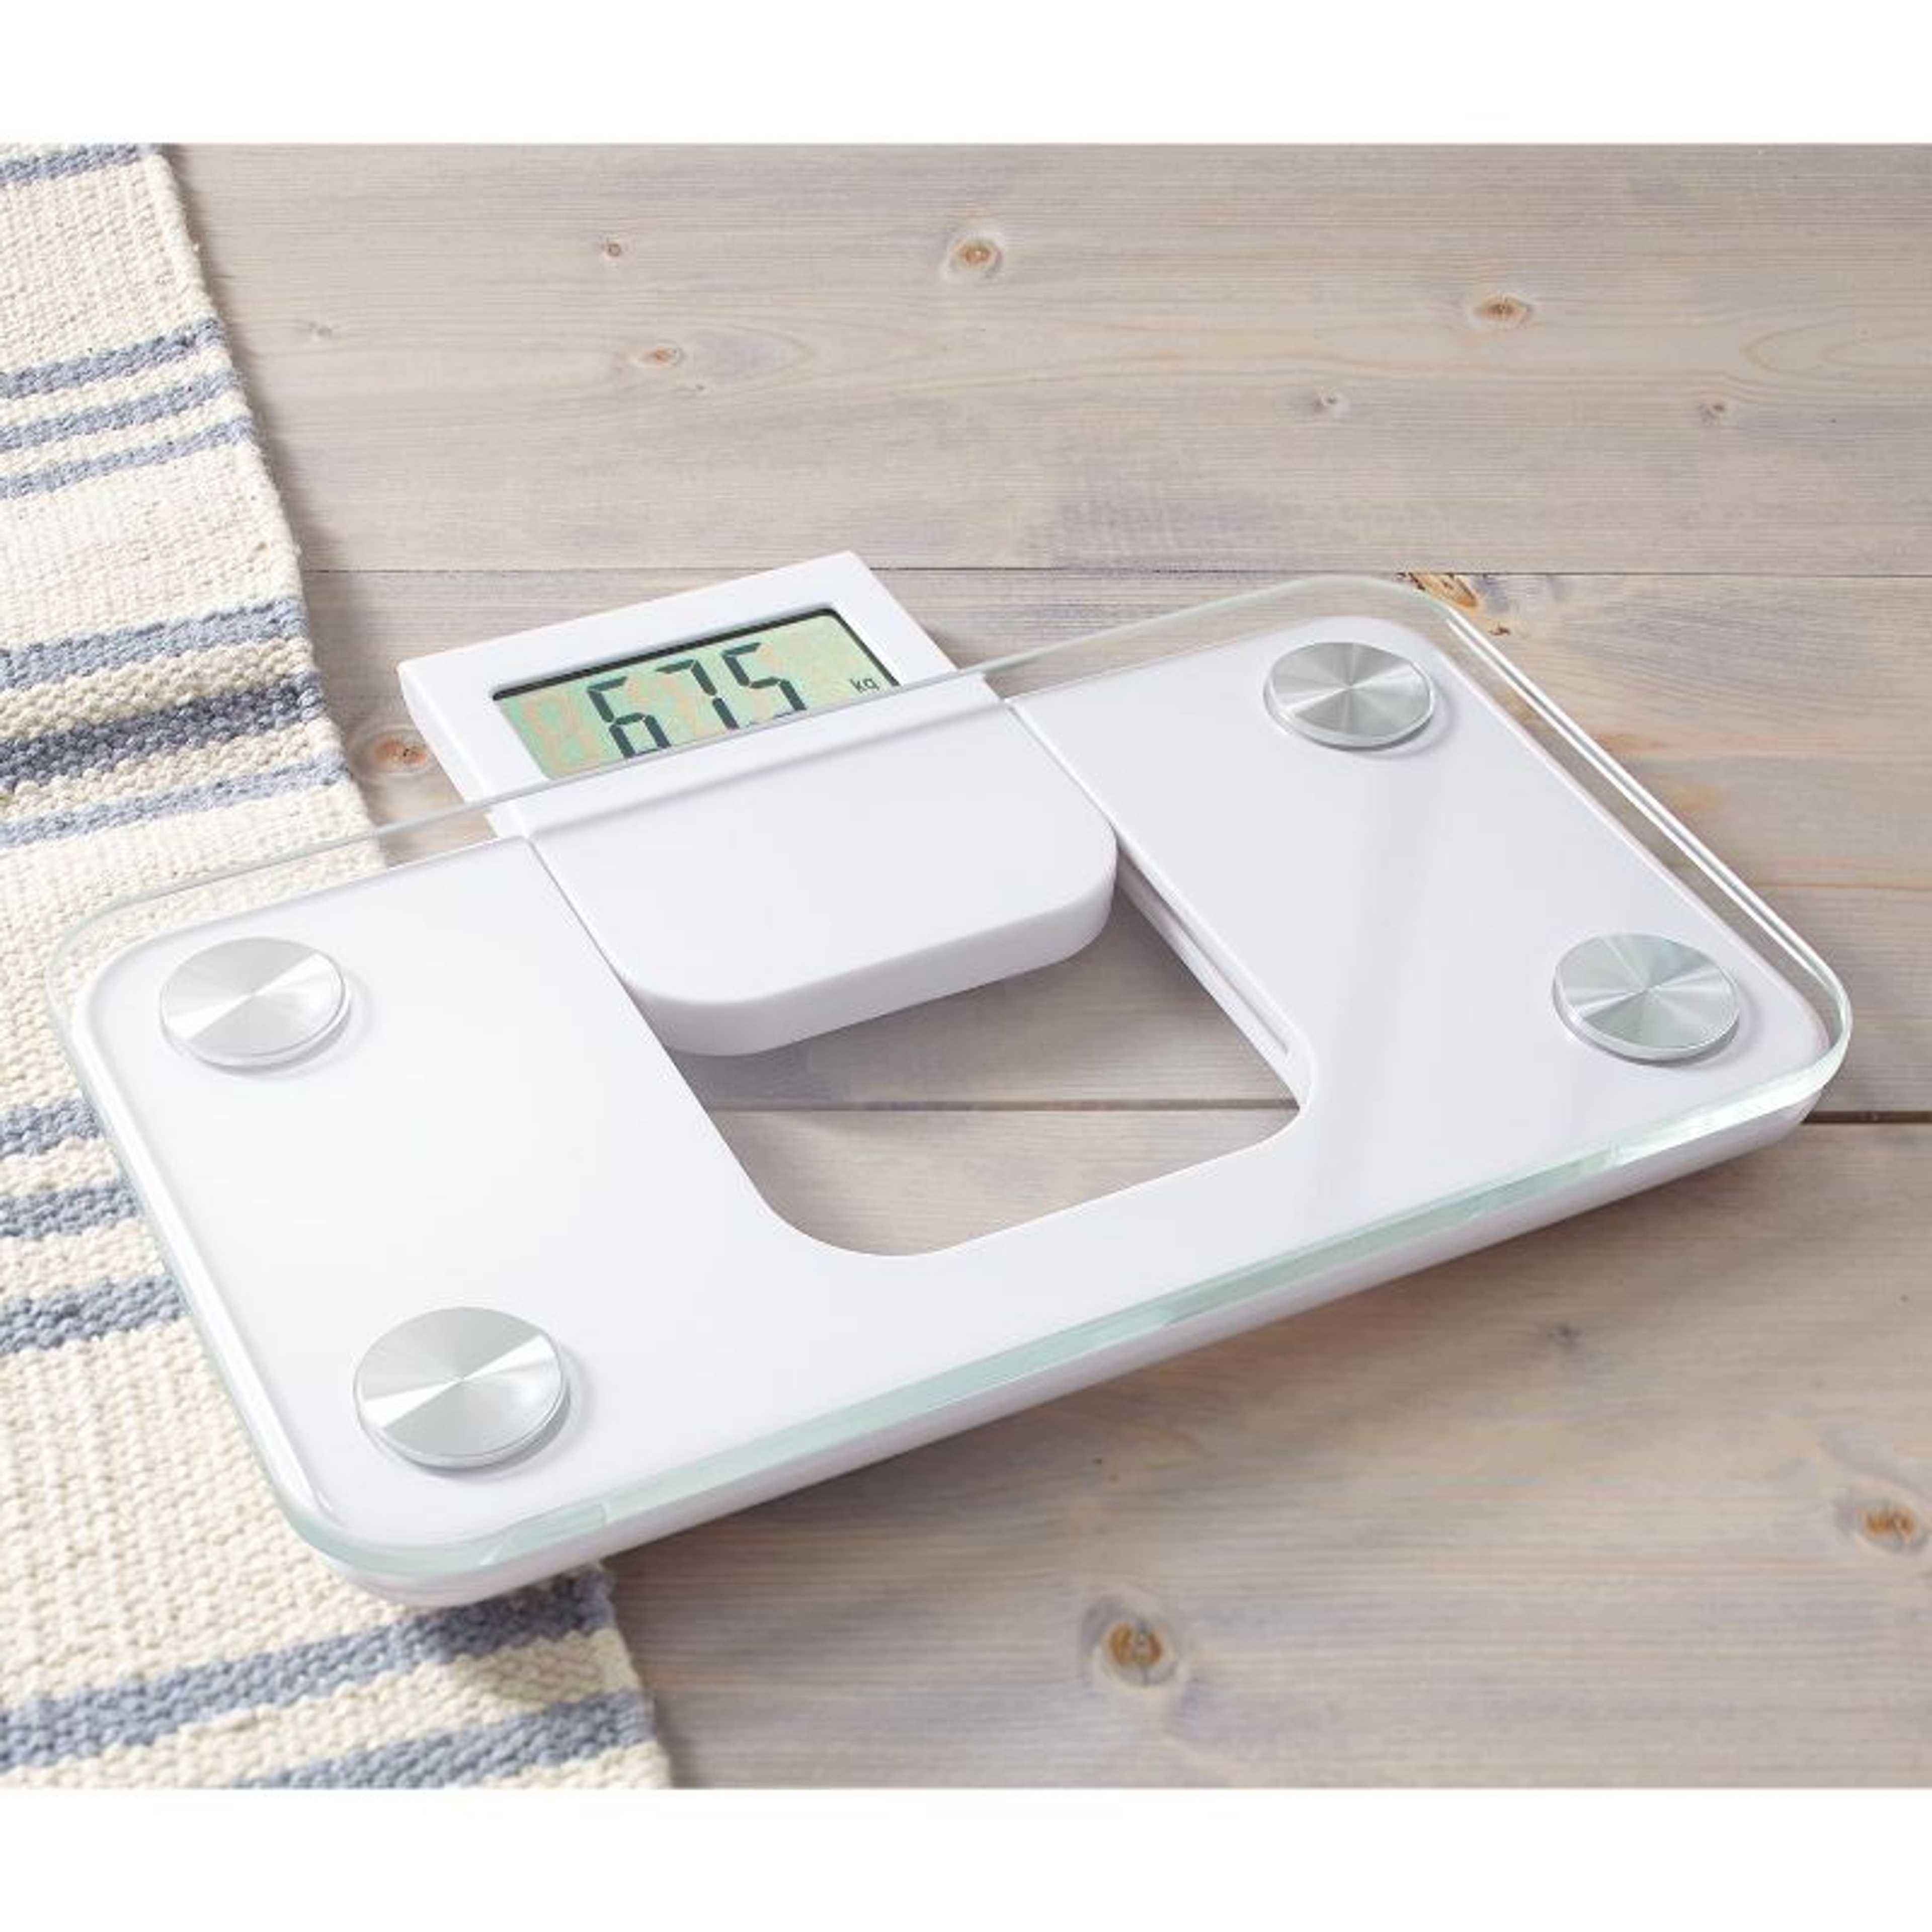 Retractable Display Compact Bathroom Scale - White, Digital LCD Display Personal Health Check Up Body Fitness Bathroom Weighing Scale, Body Fat Scale